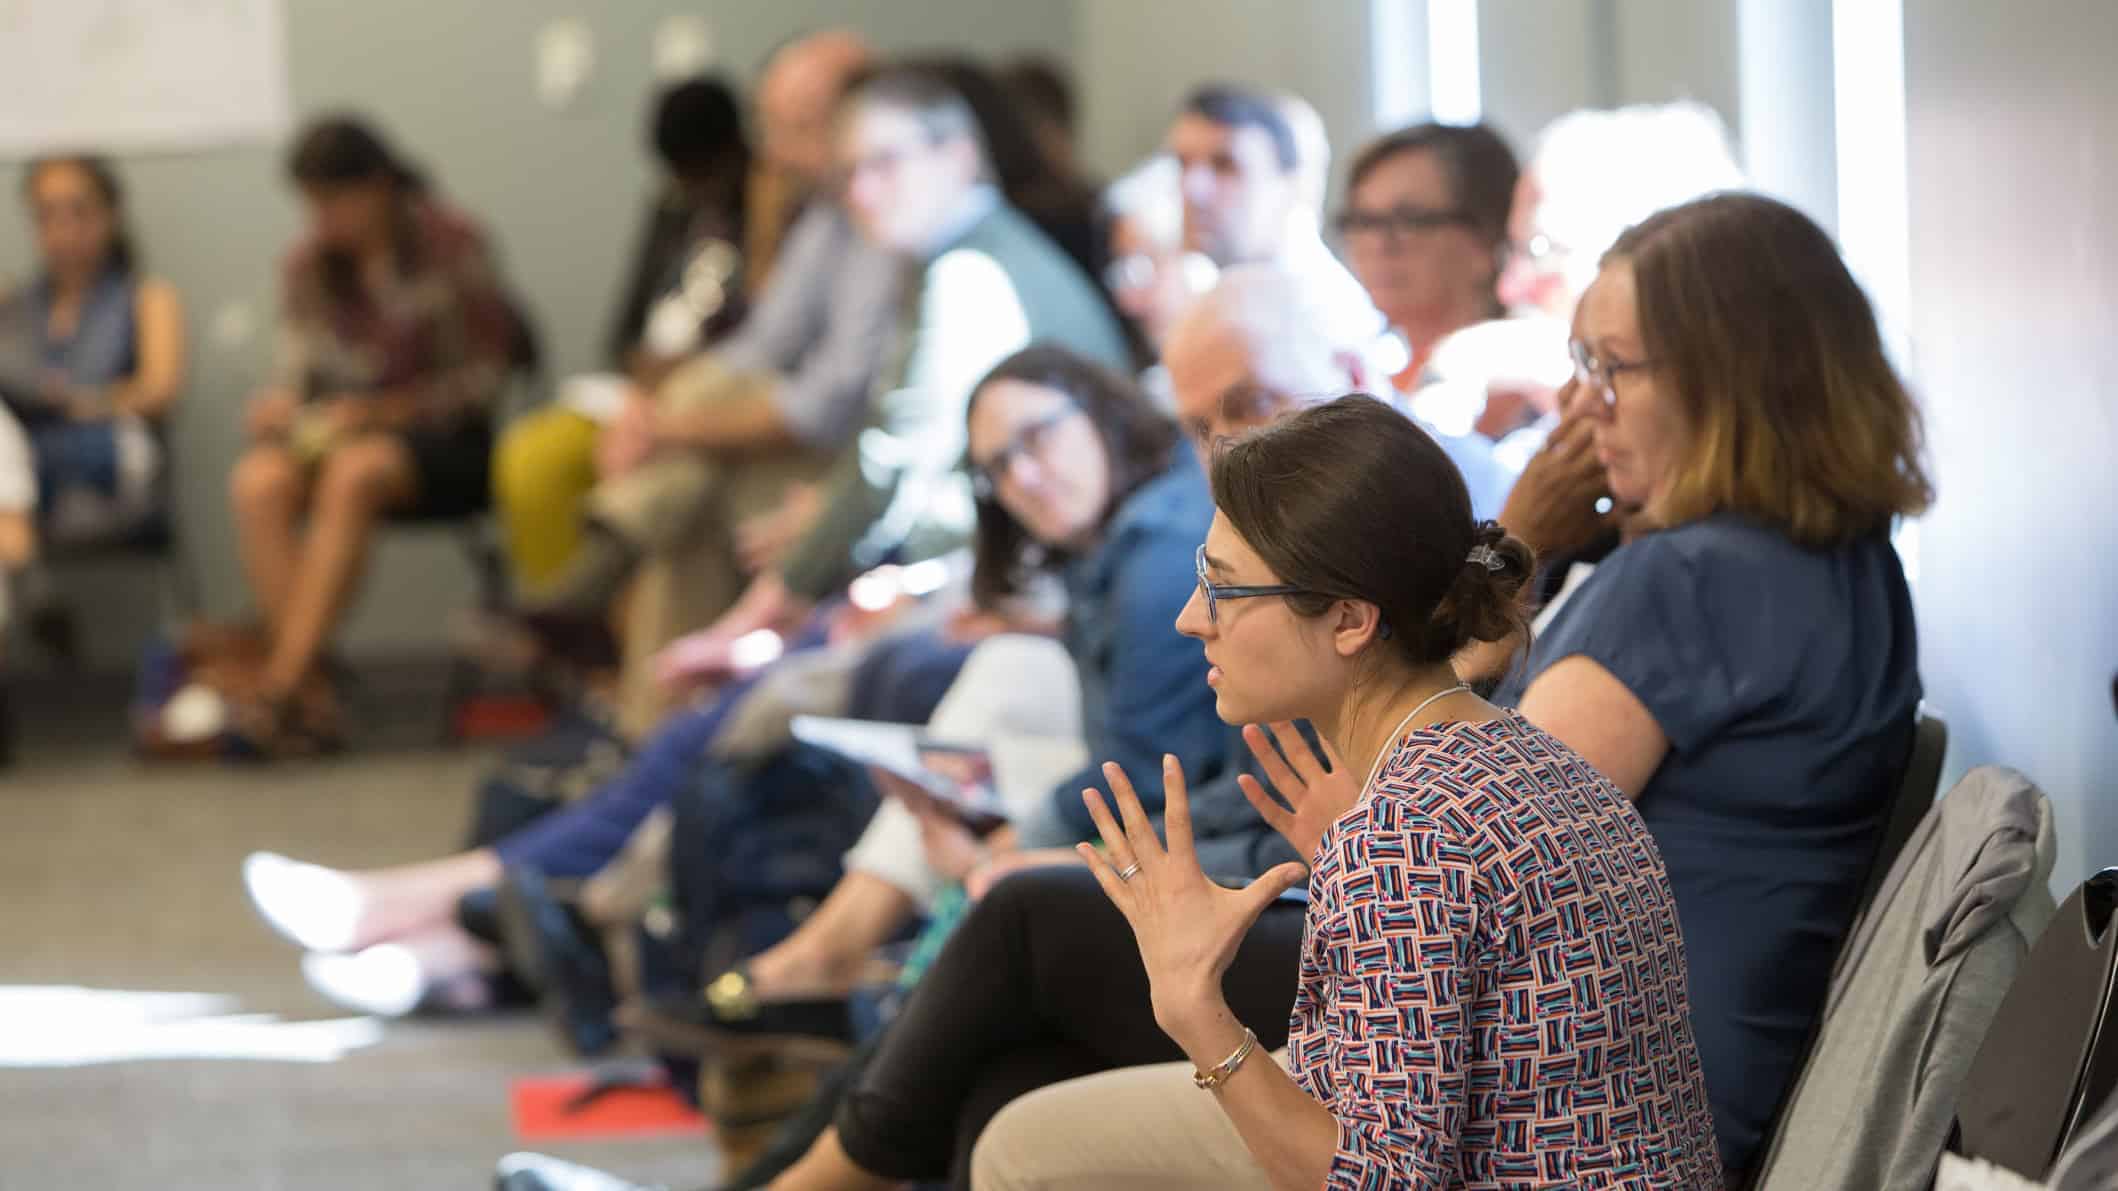 MCLA faculty, members of the community and visitors meet at the MCLA Institute for the Humanities' inaugural symposium in June 2019.